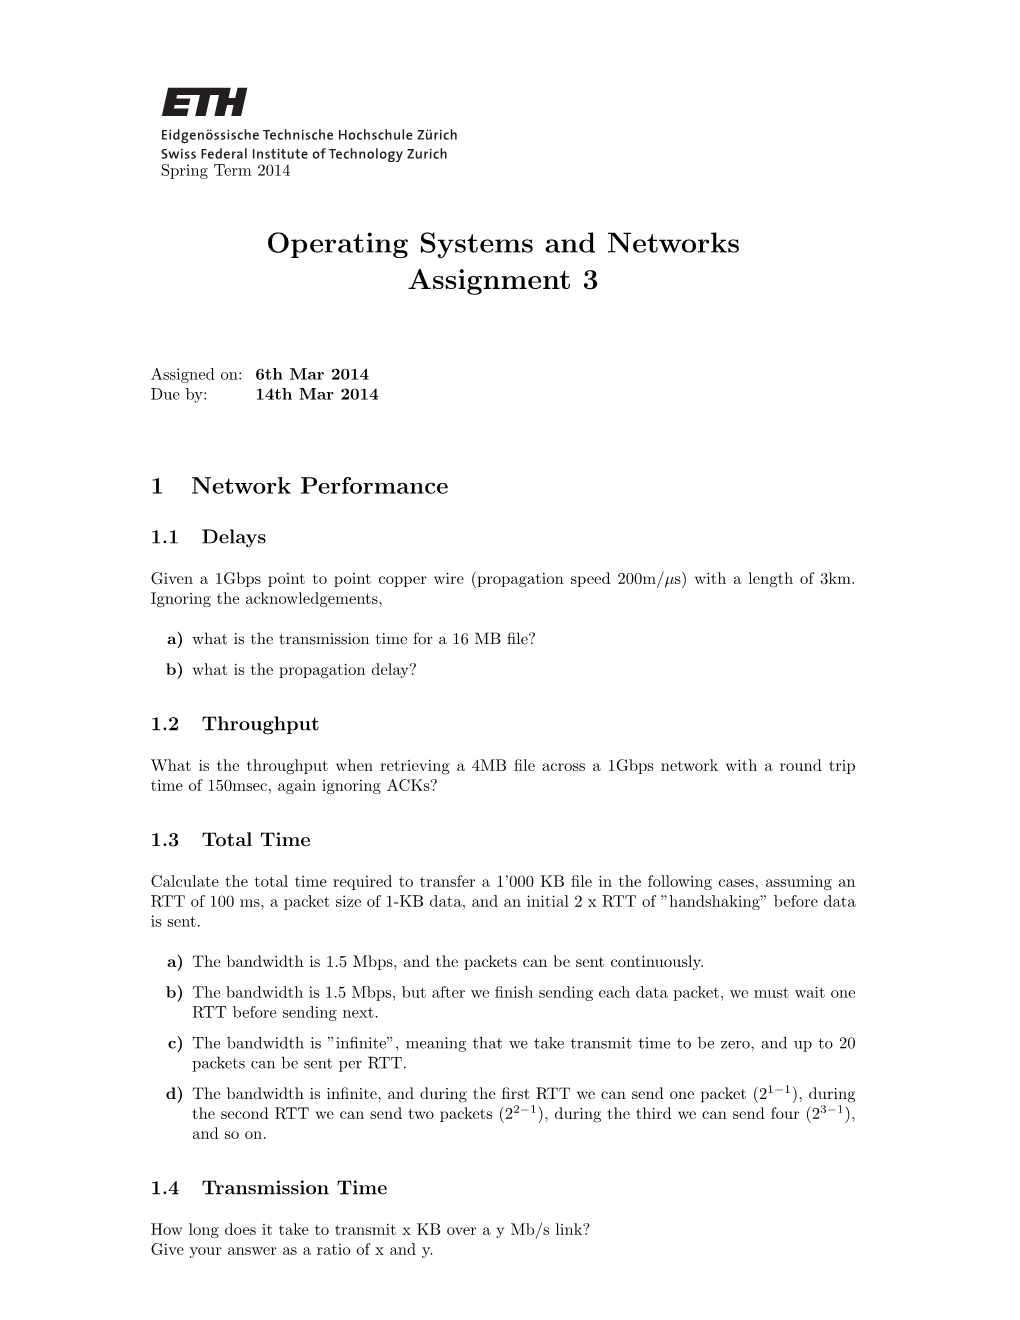 Operating Systems and Networks Assignment 3